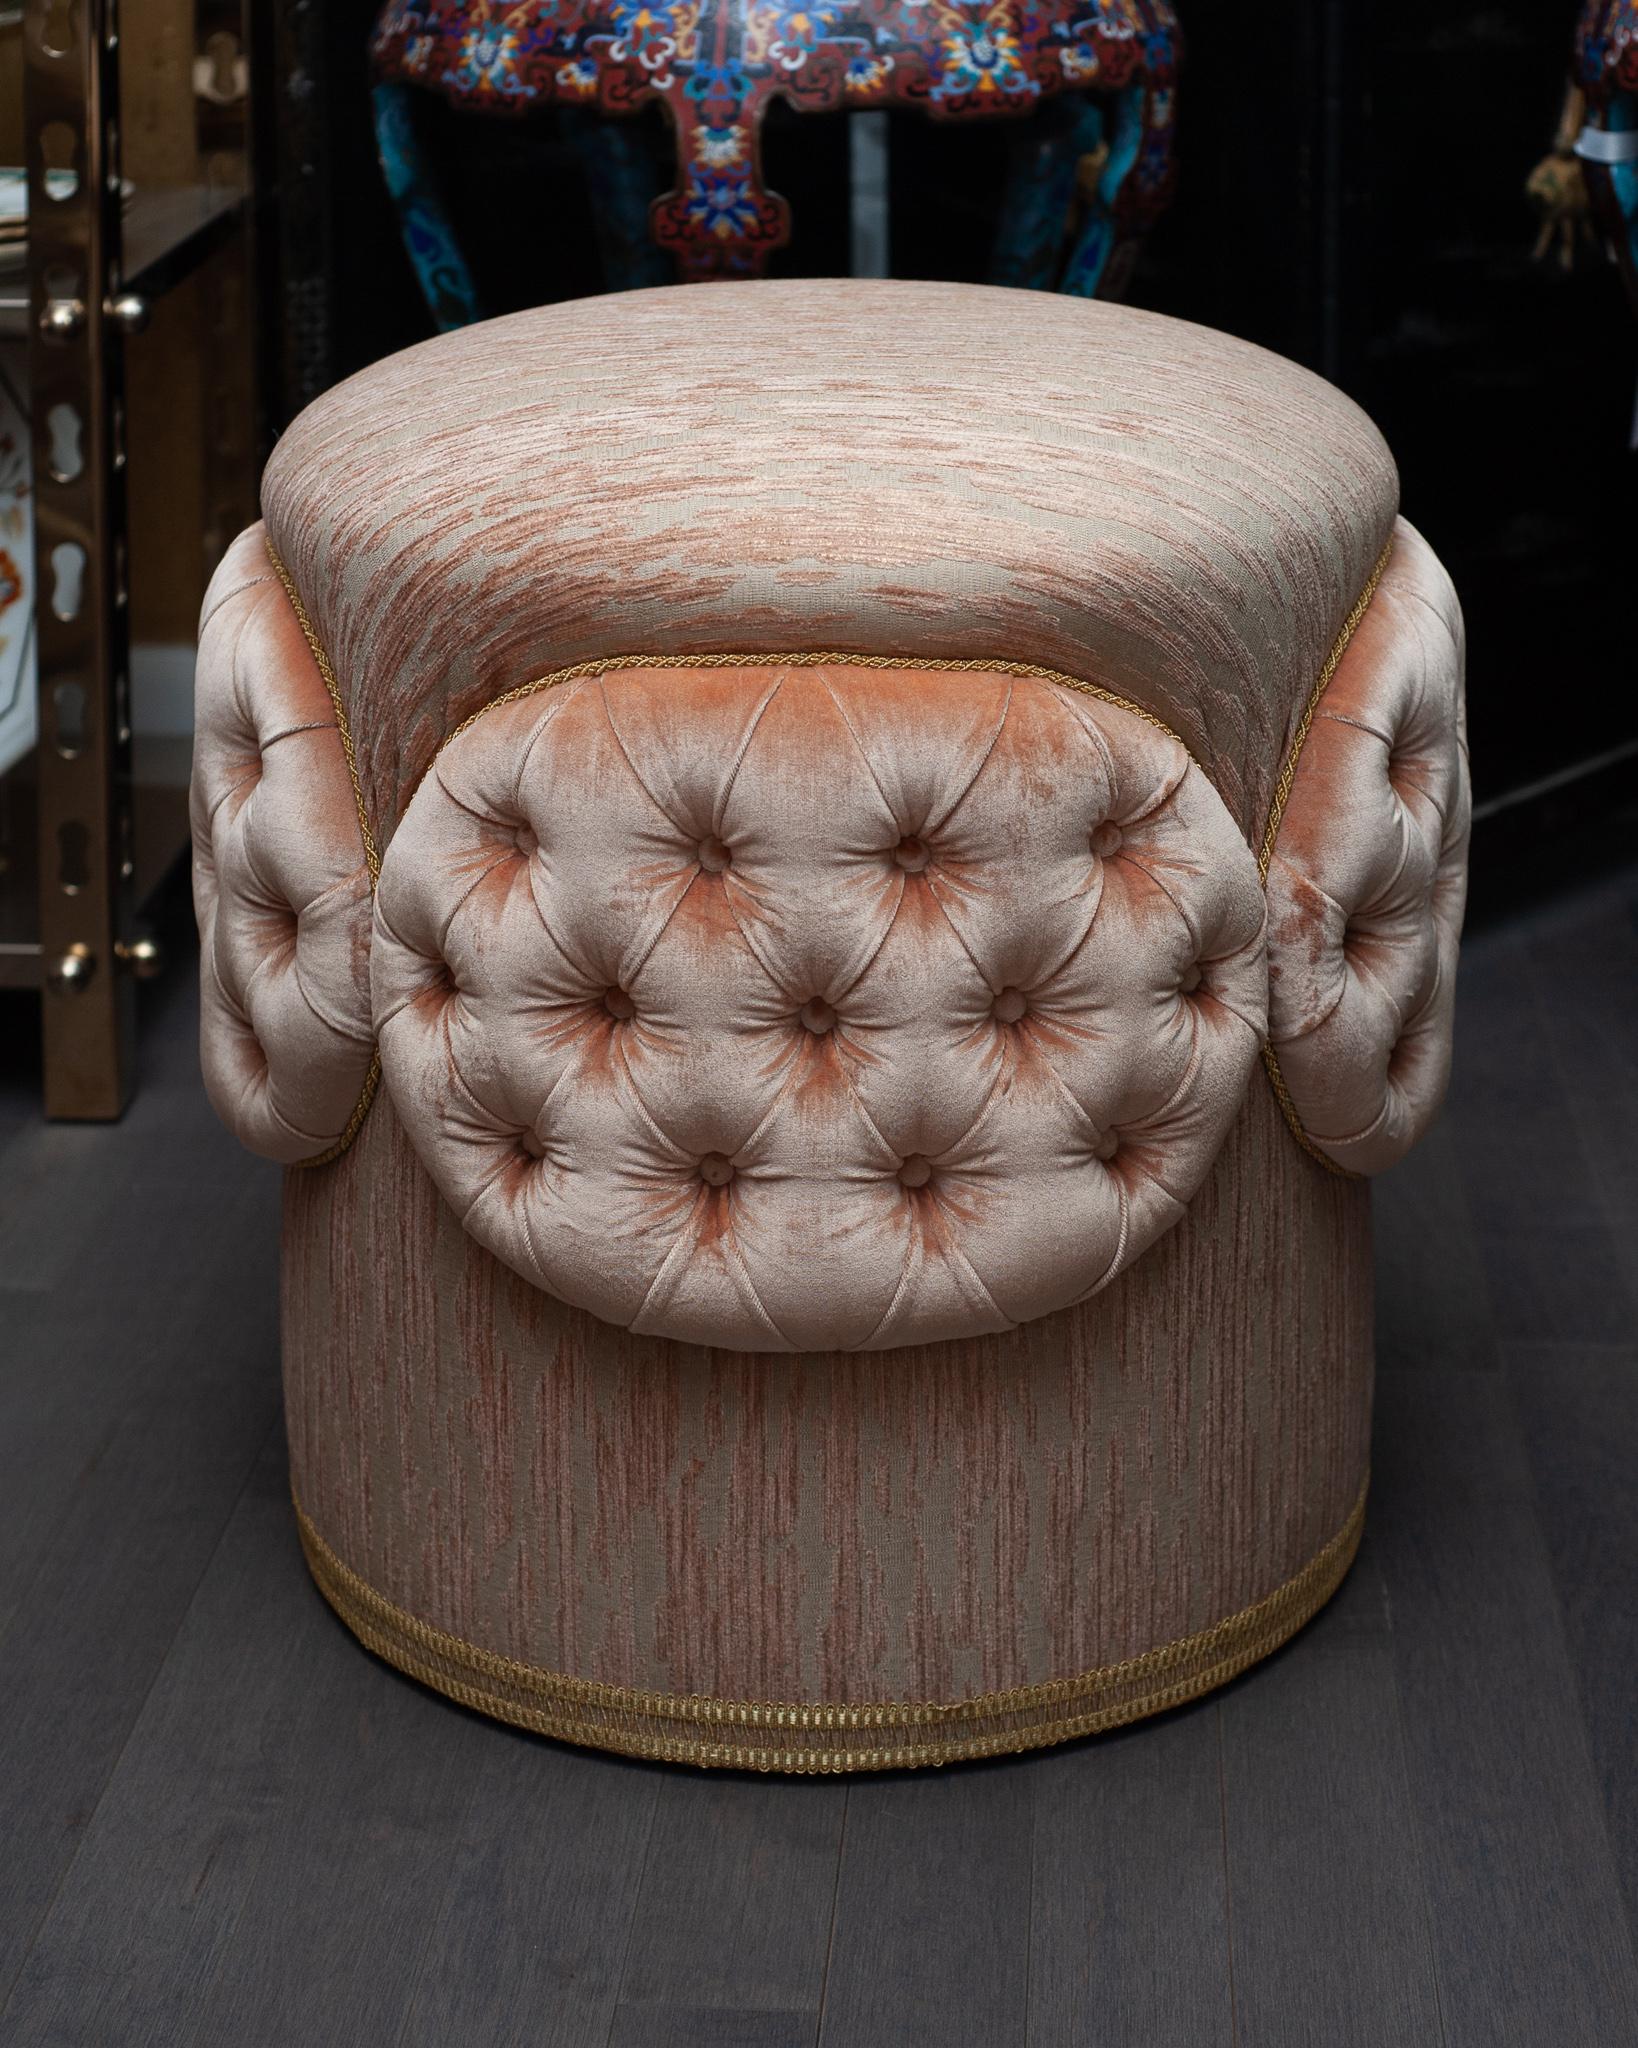 The craft of fine upholstery is an art and Maison Nurita presents this stunning hand upholstered Ottoman. Inspired by the Napoleon III style, this Ottoman is upholstered with deep tufted curved panels in a Sabina Fay Braxton silk velvet and finished